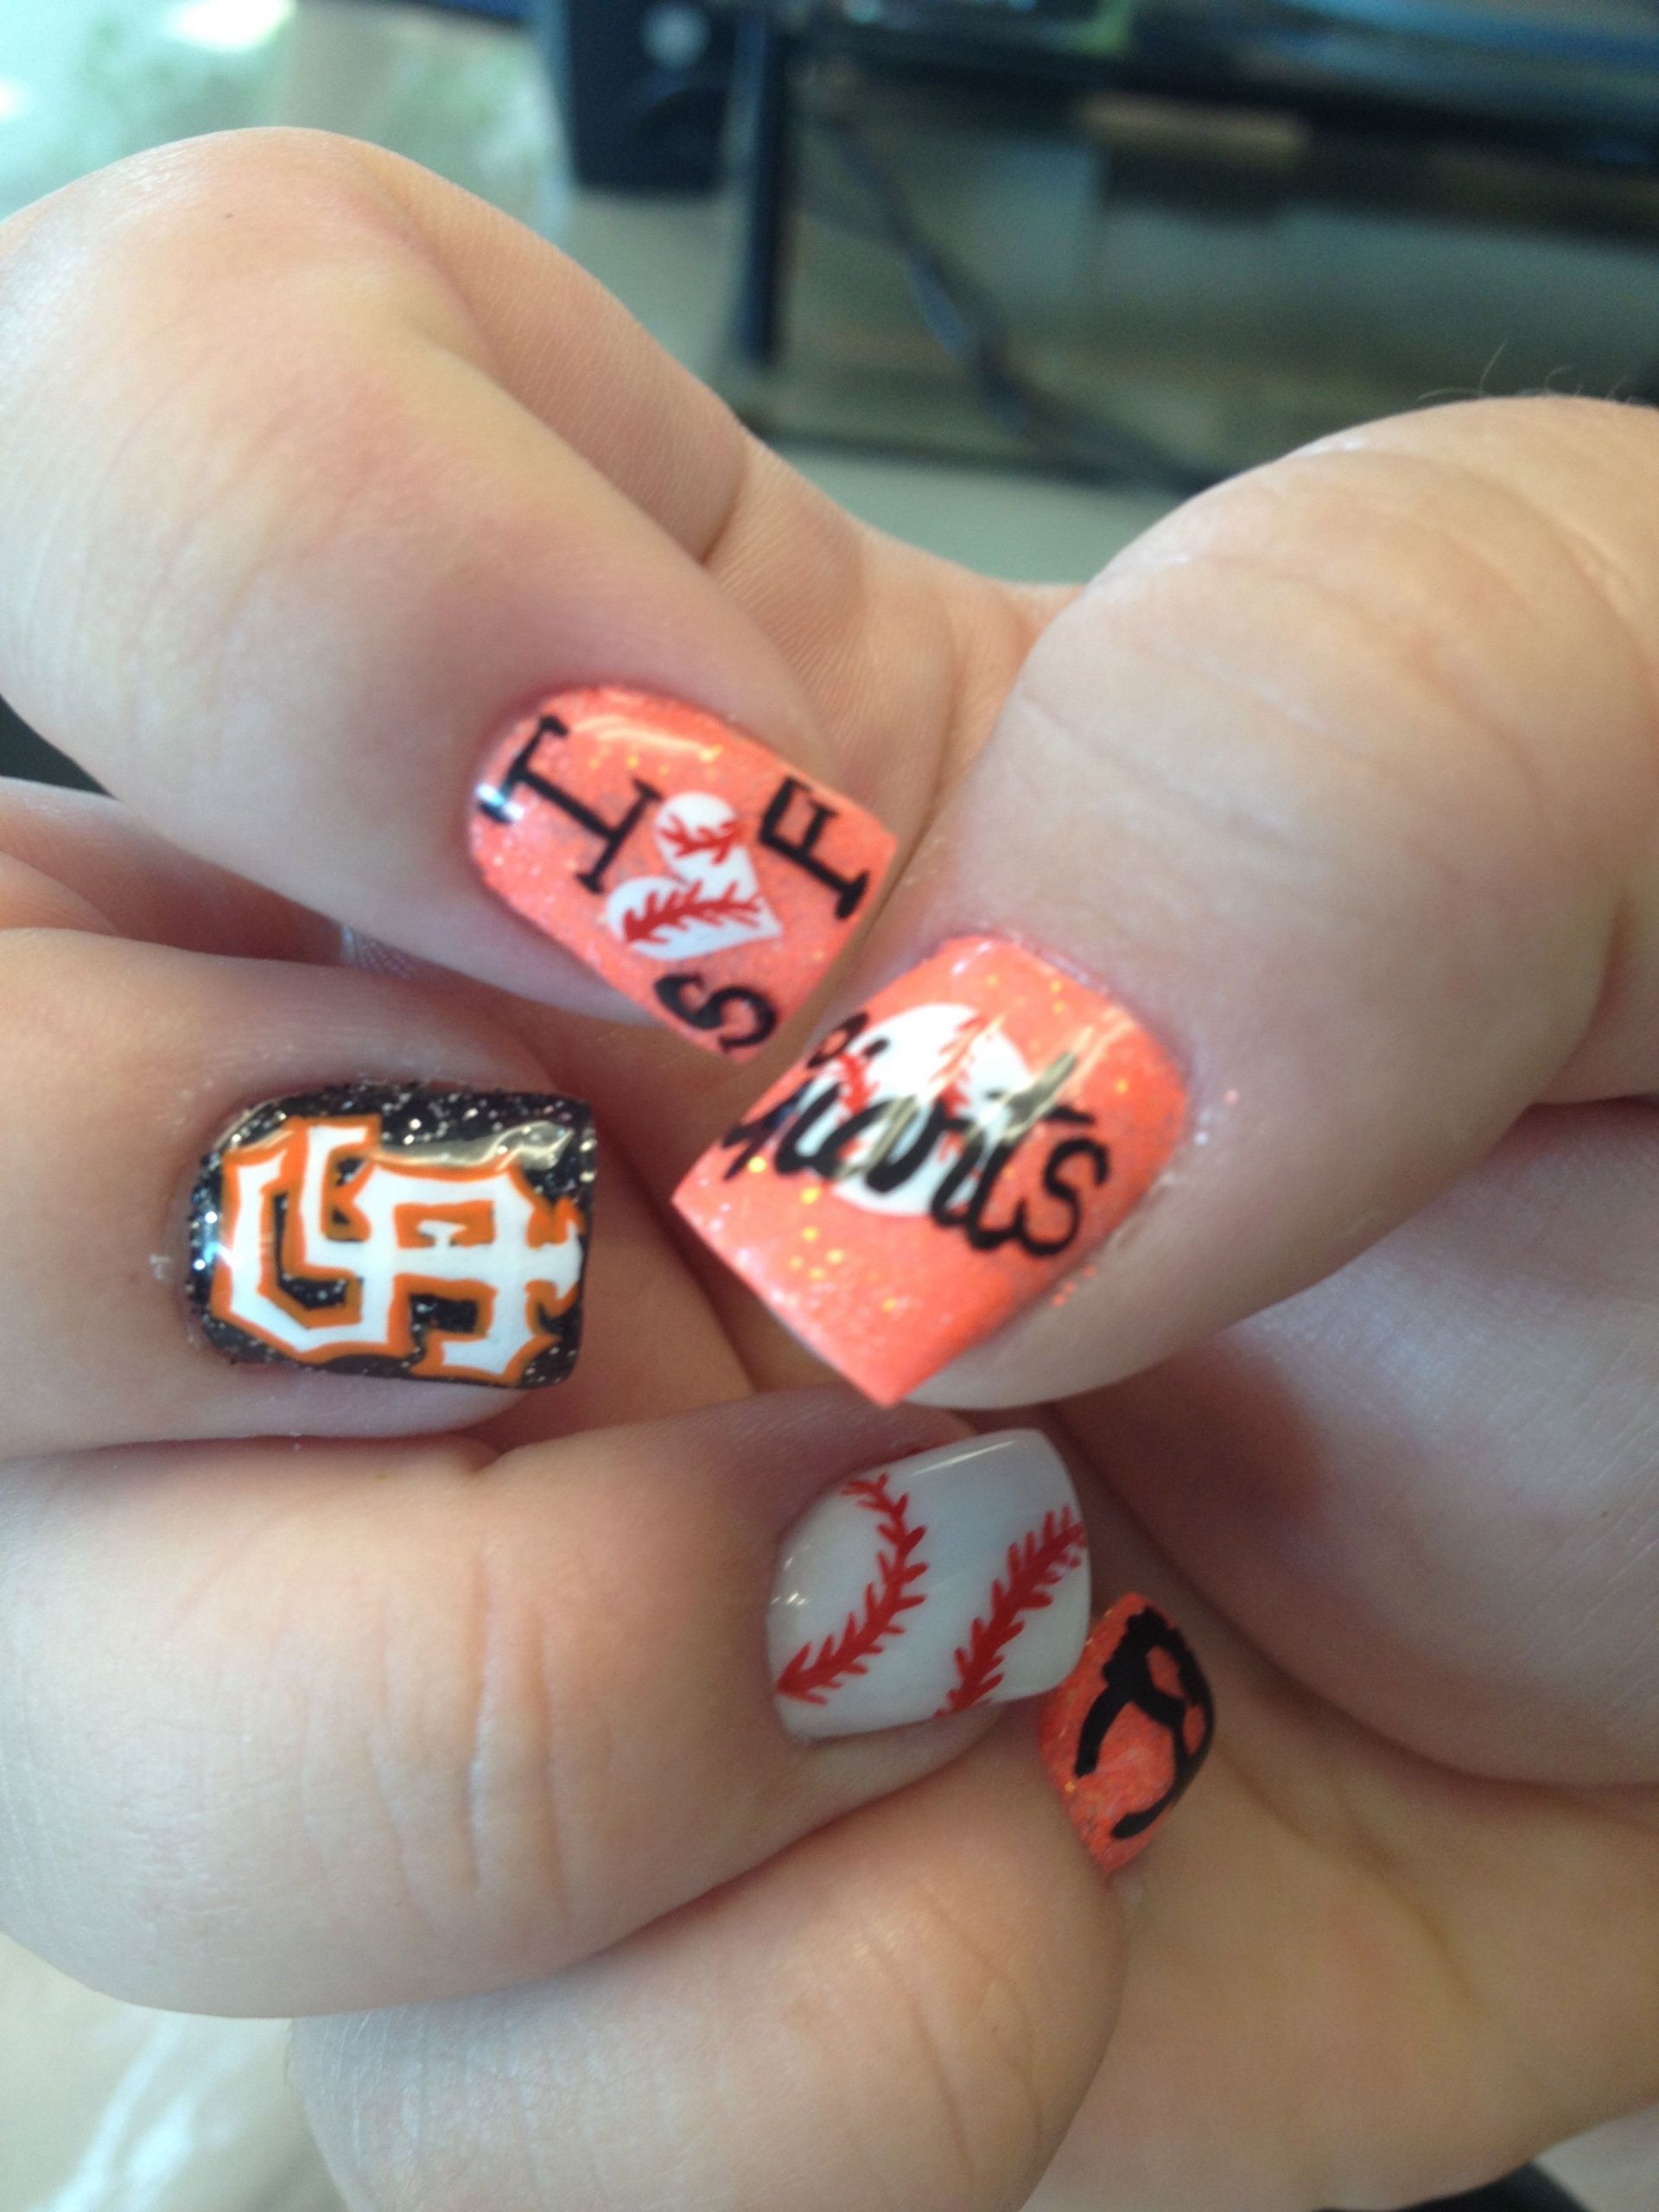 Sf Giants Nail Art
 SF Giants Nails by Jamie My Nails